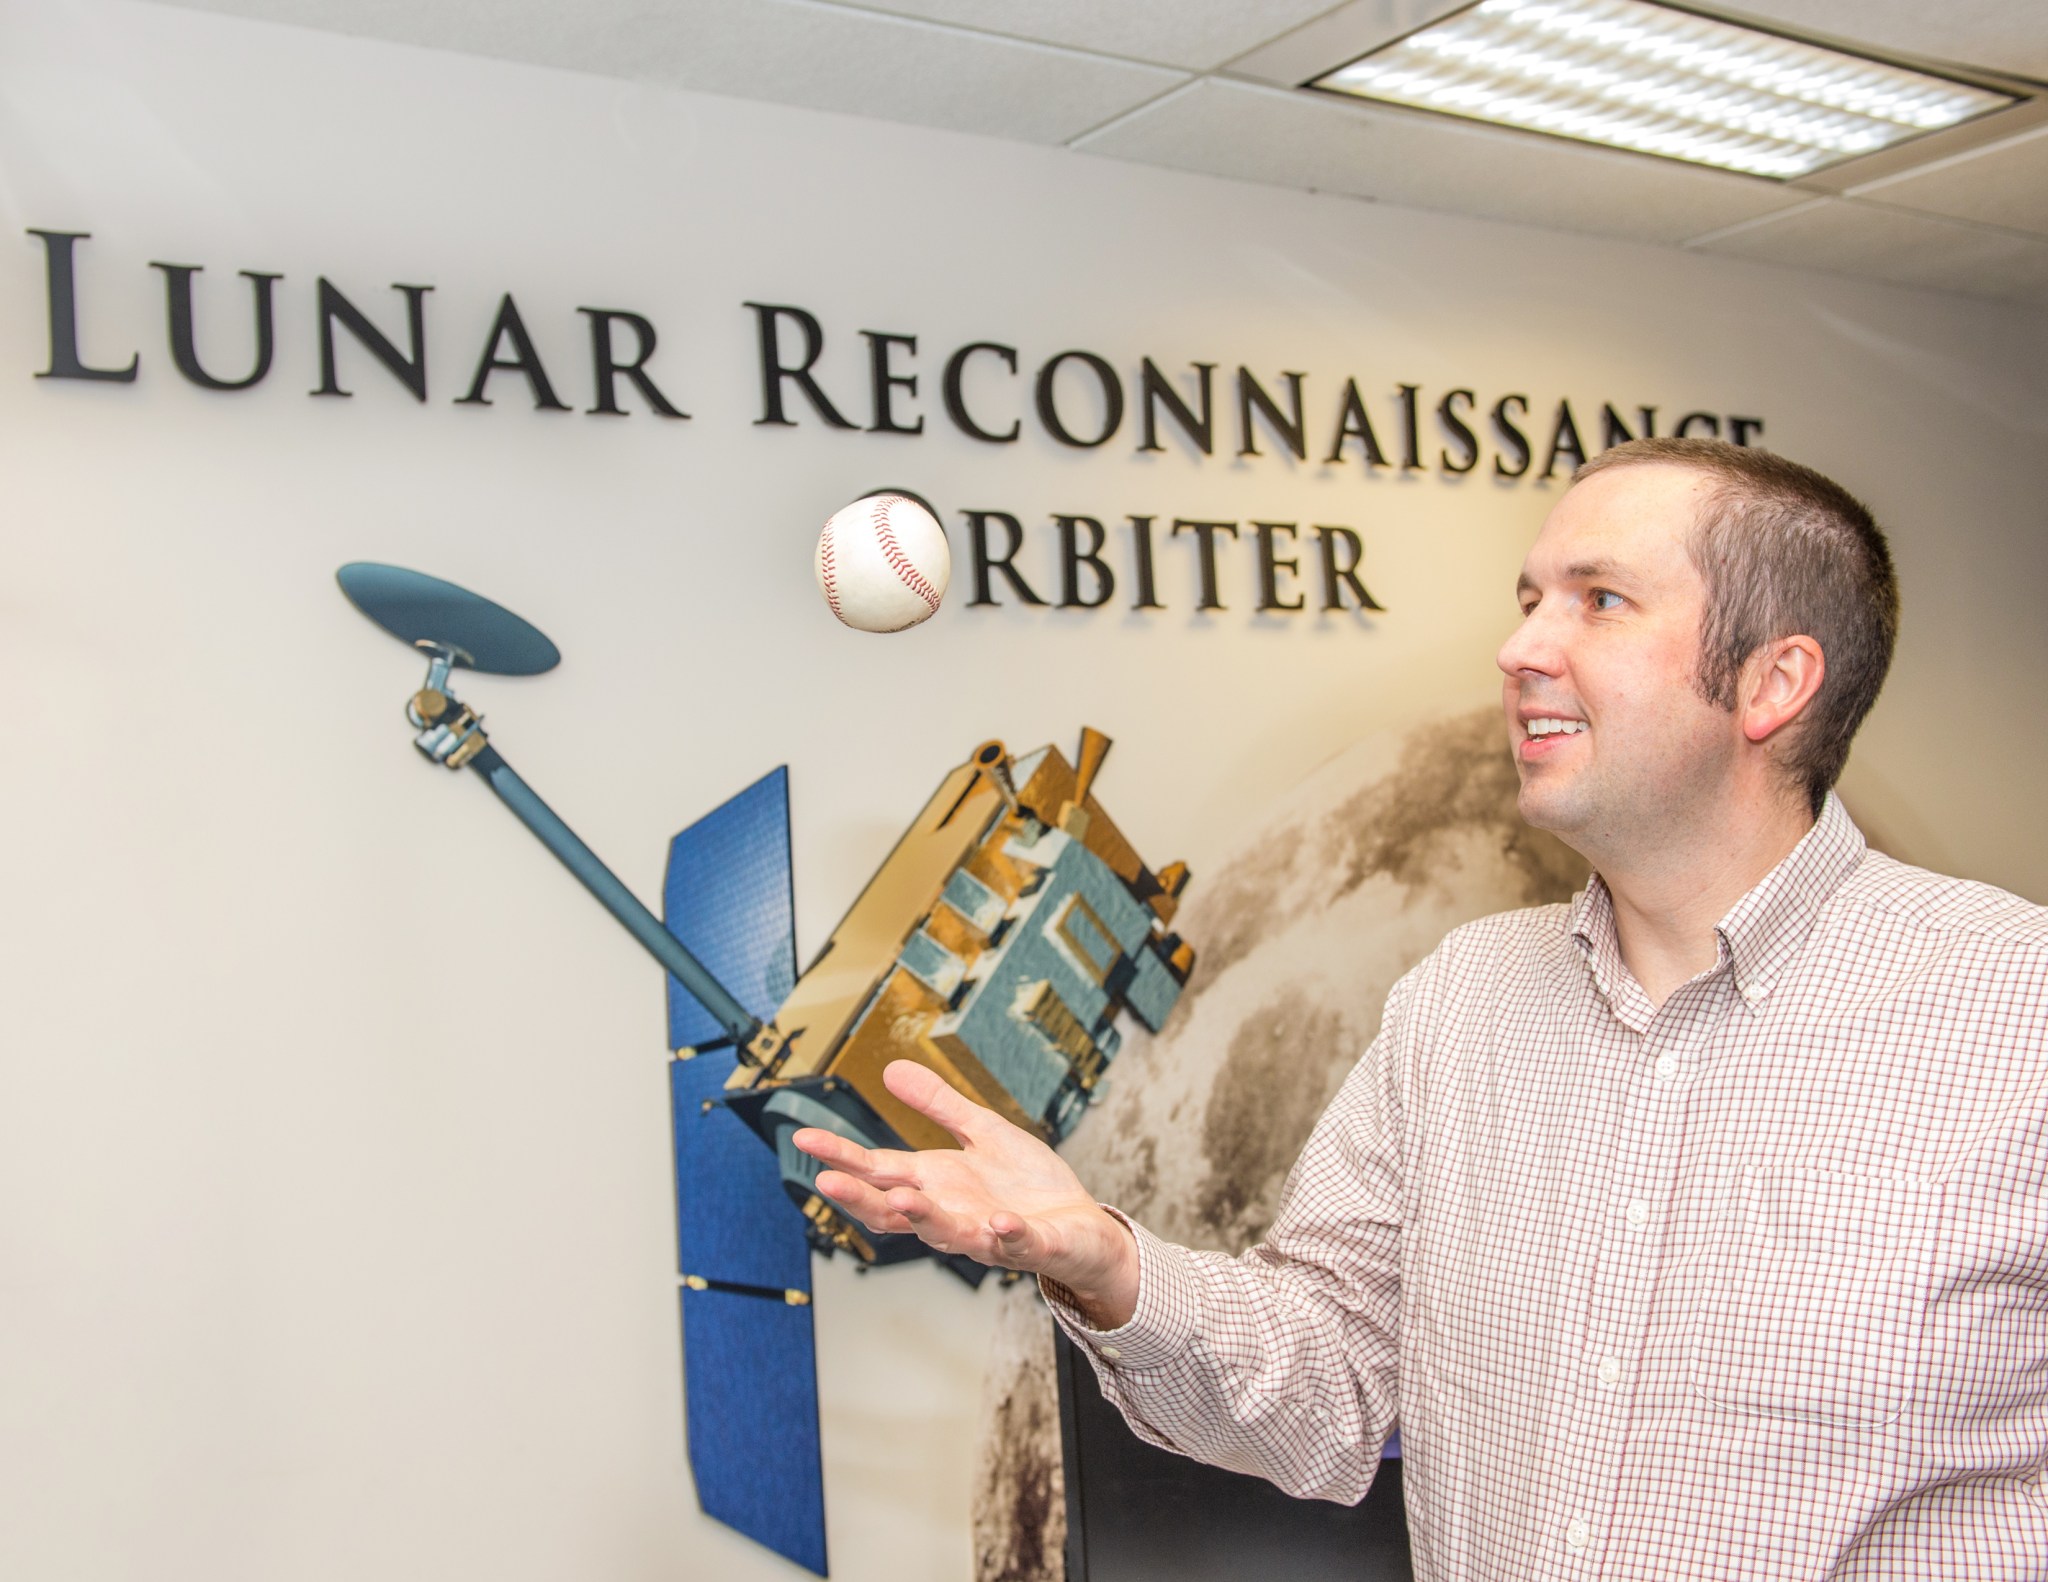 Noah Petro tosses a baseball in the air in front of the Lunar Reconnaissance Orbiter model.